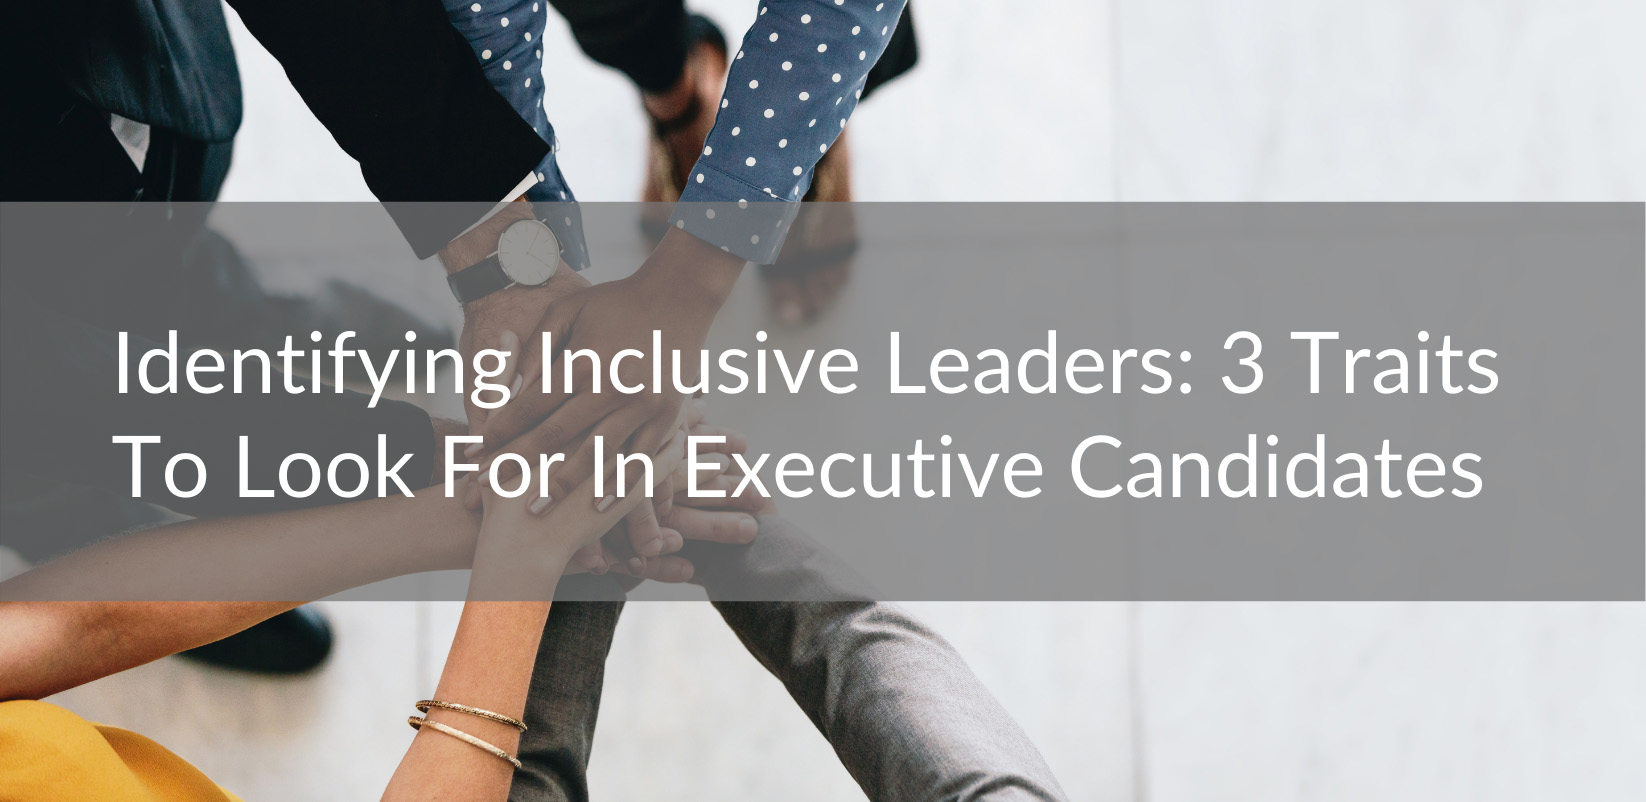 How to Identify Inclusive Leaders